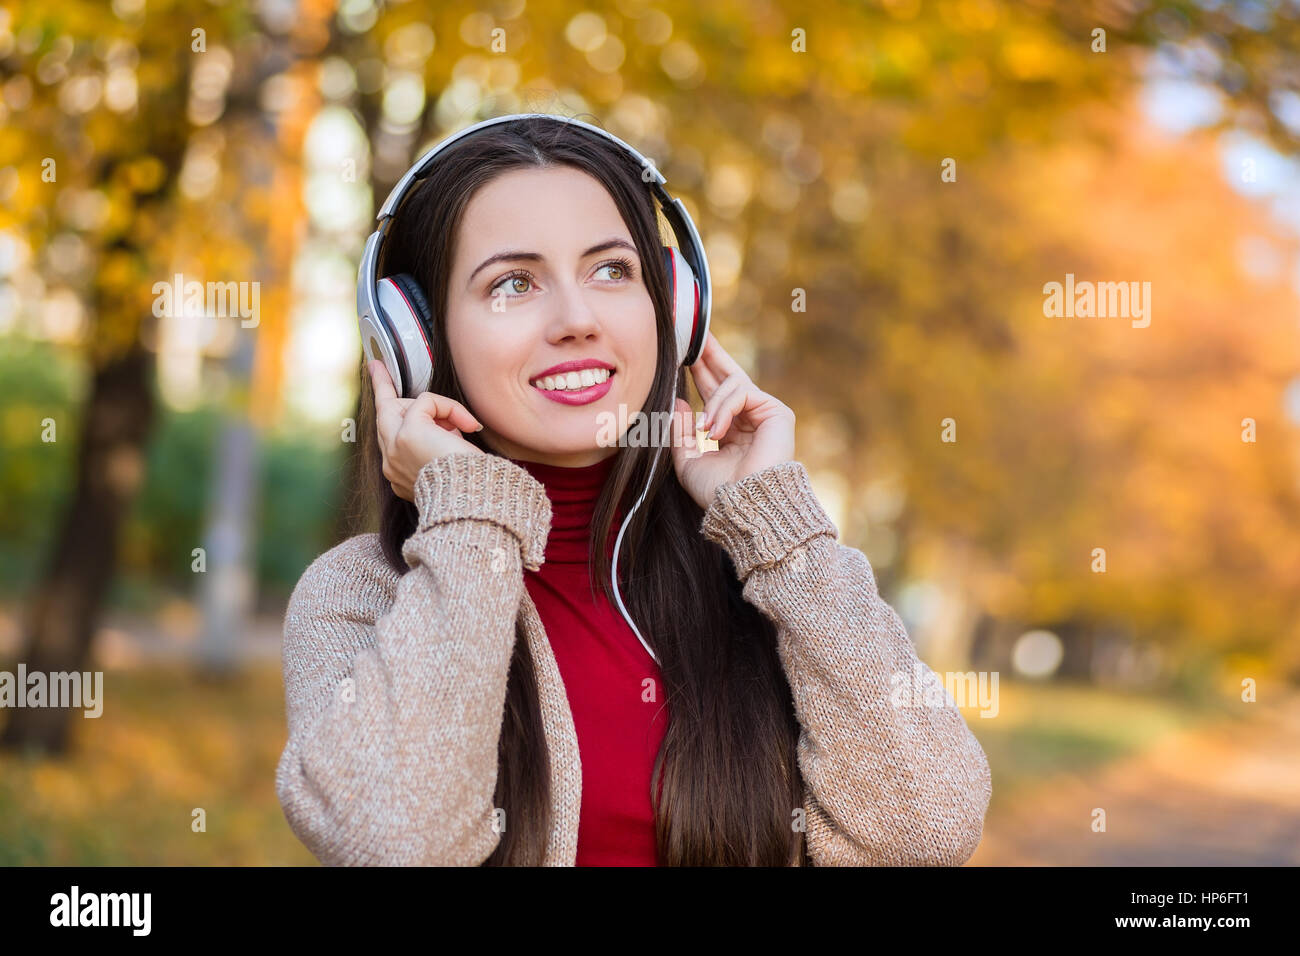 Young caucasian brunette woman with headphones outdoors on autumn day. Girl listening music in headphones in autumn park. Portrait of woman at outdoor Stock Photo